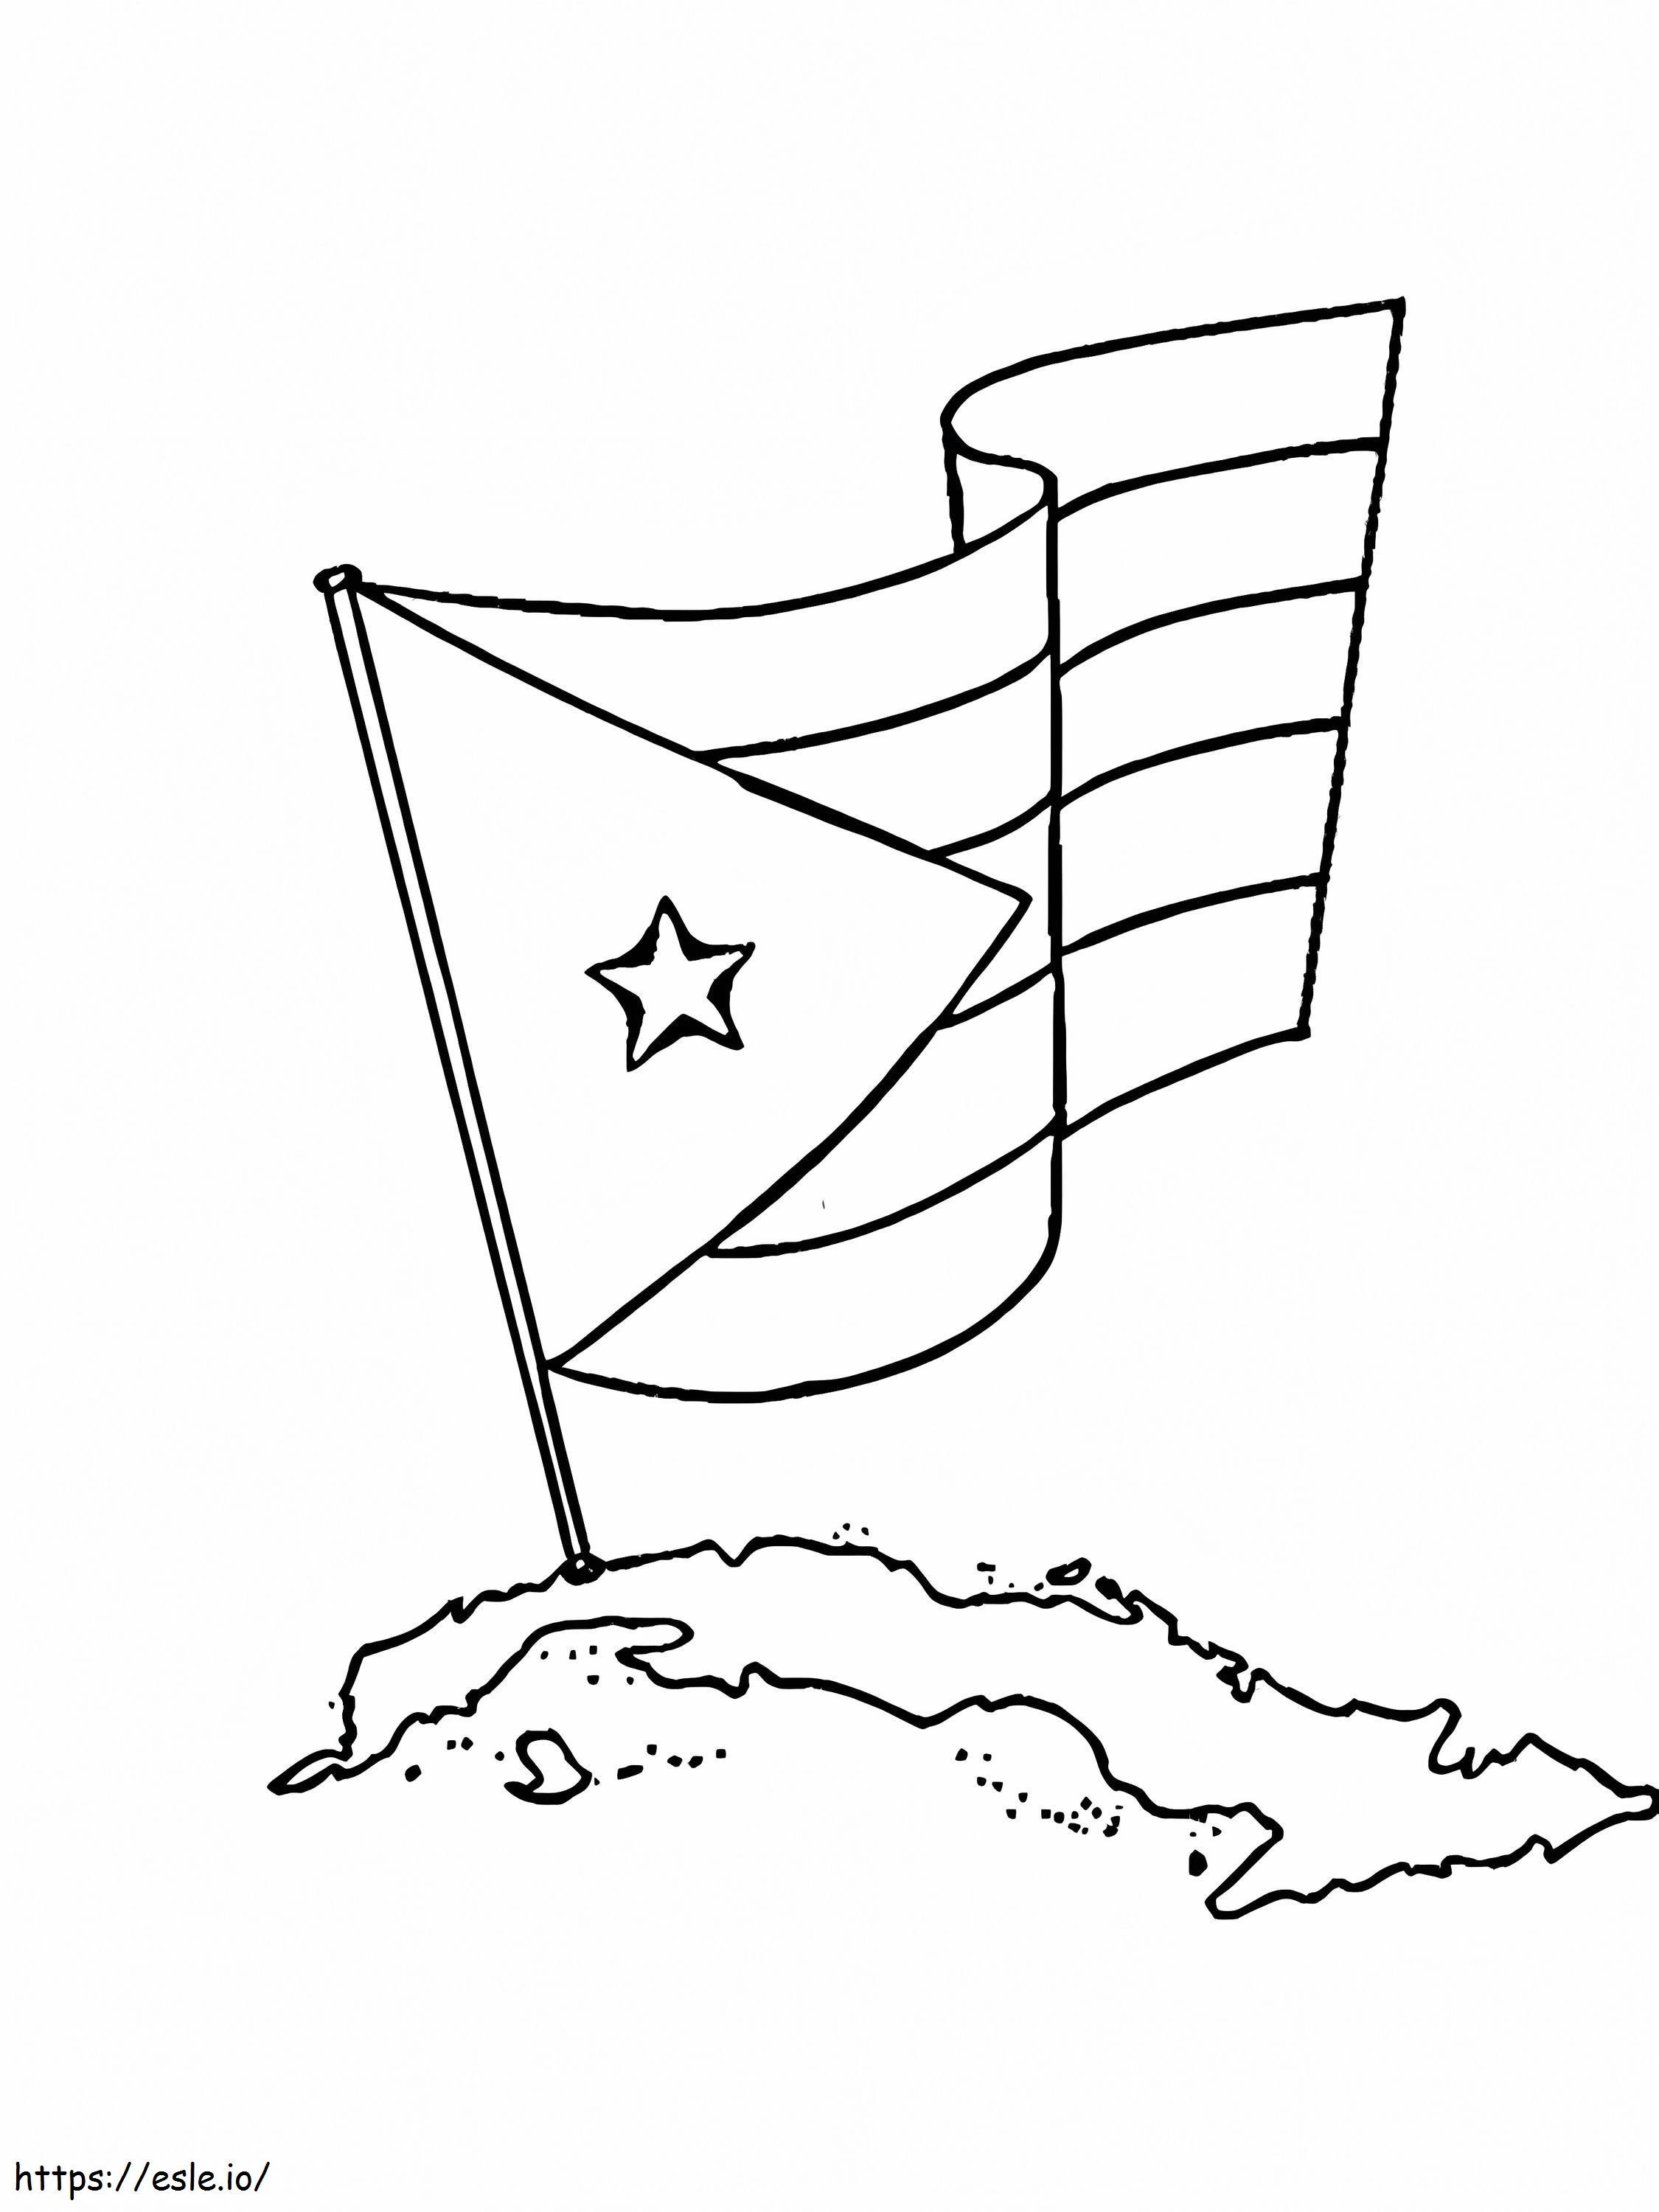 Cuba Flag And Map coloring page